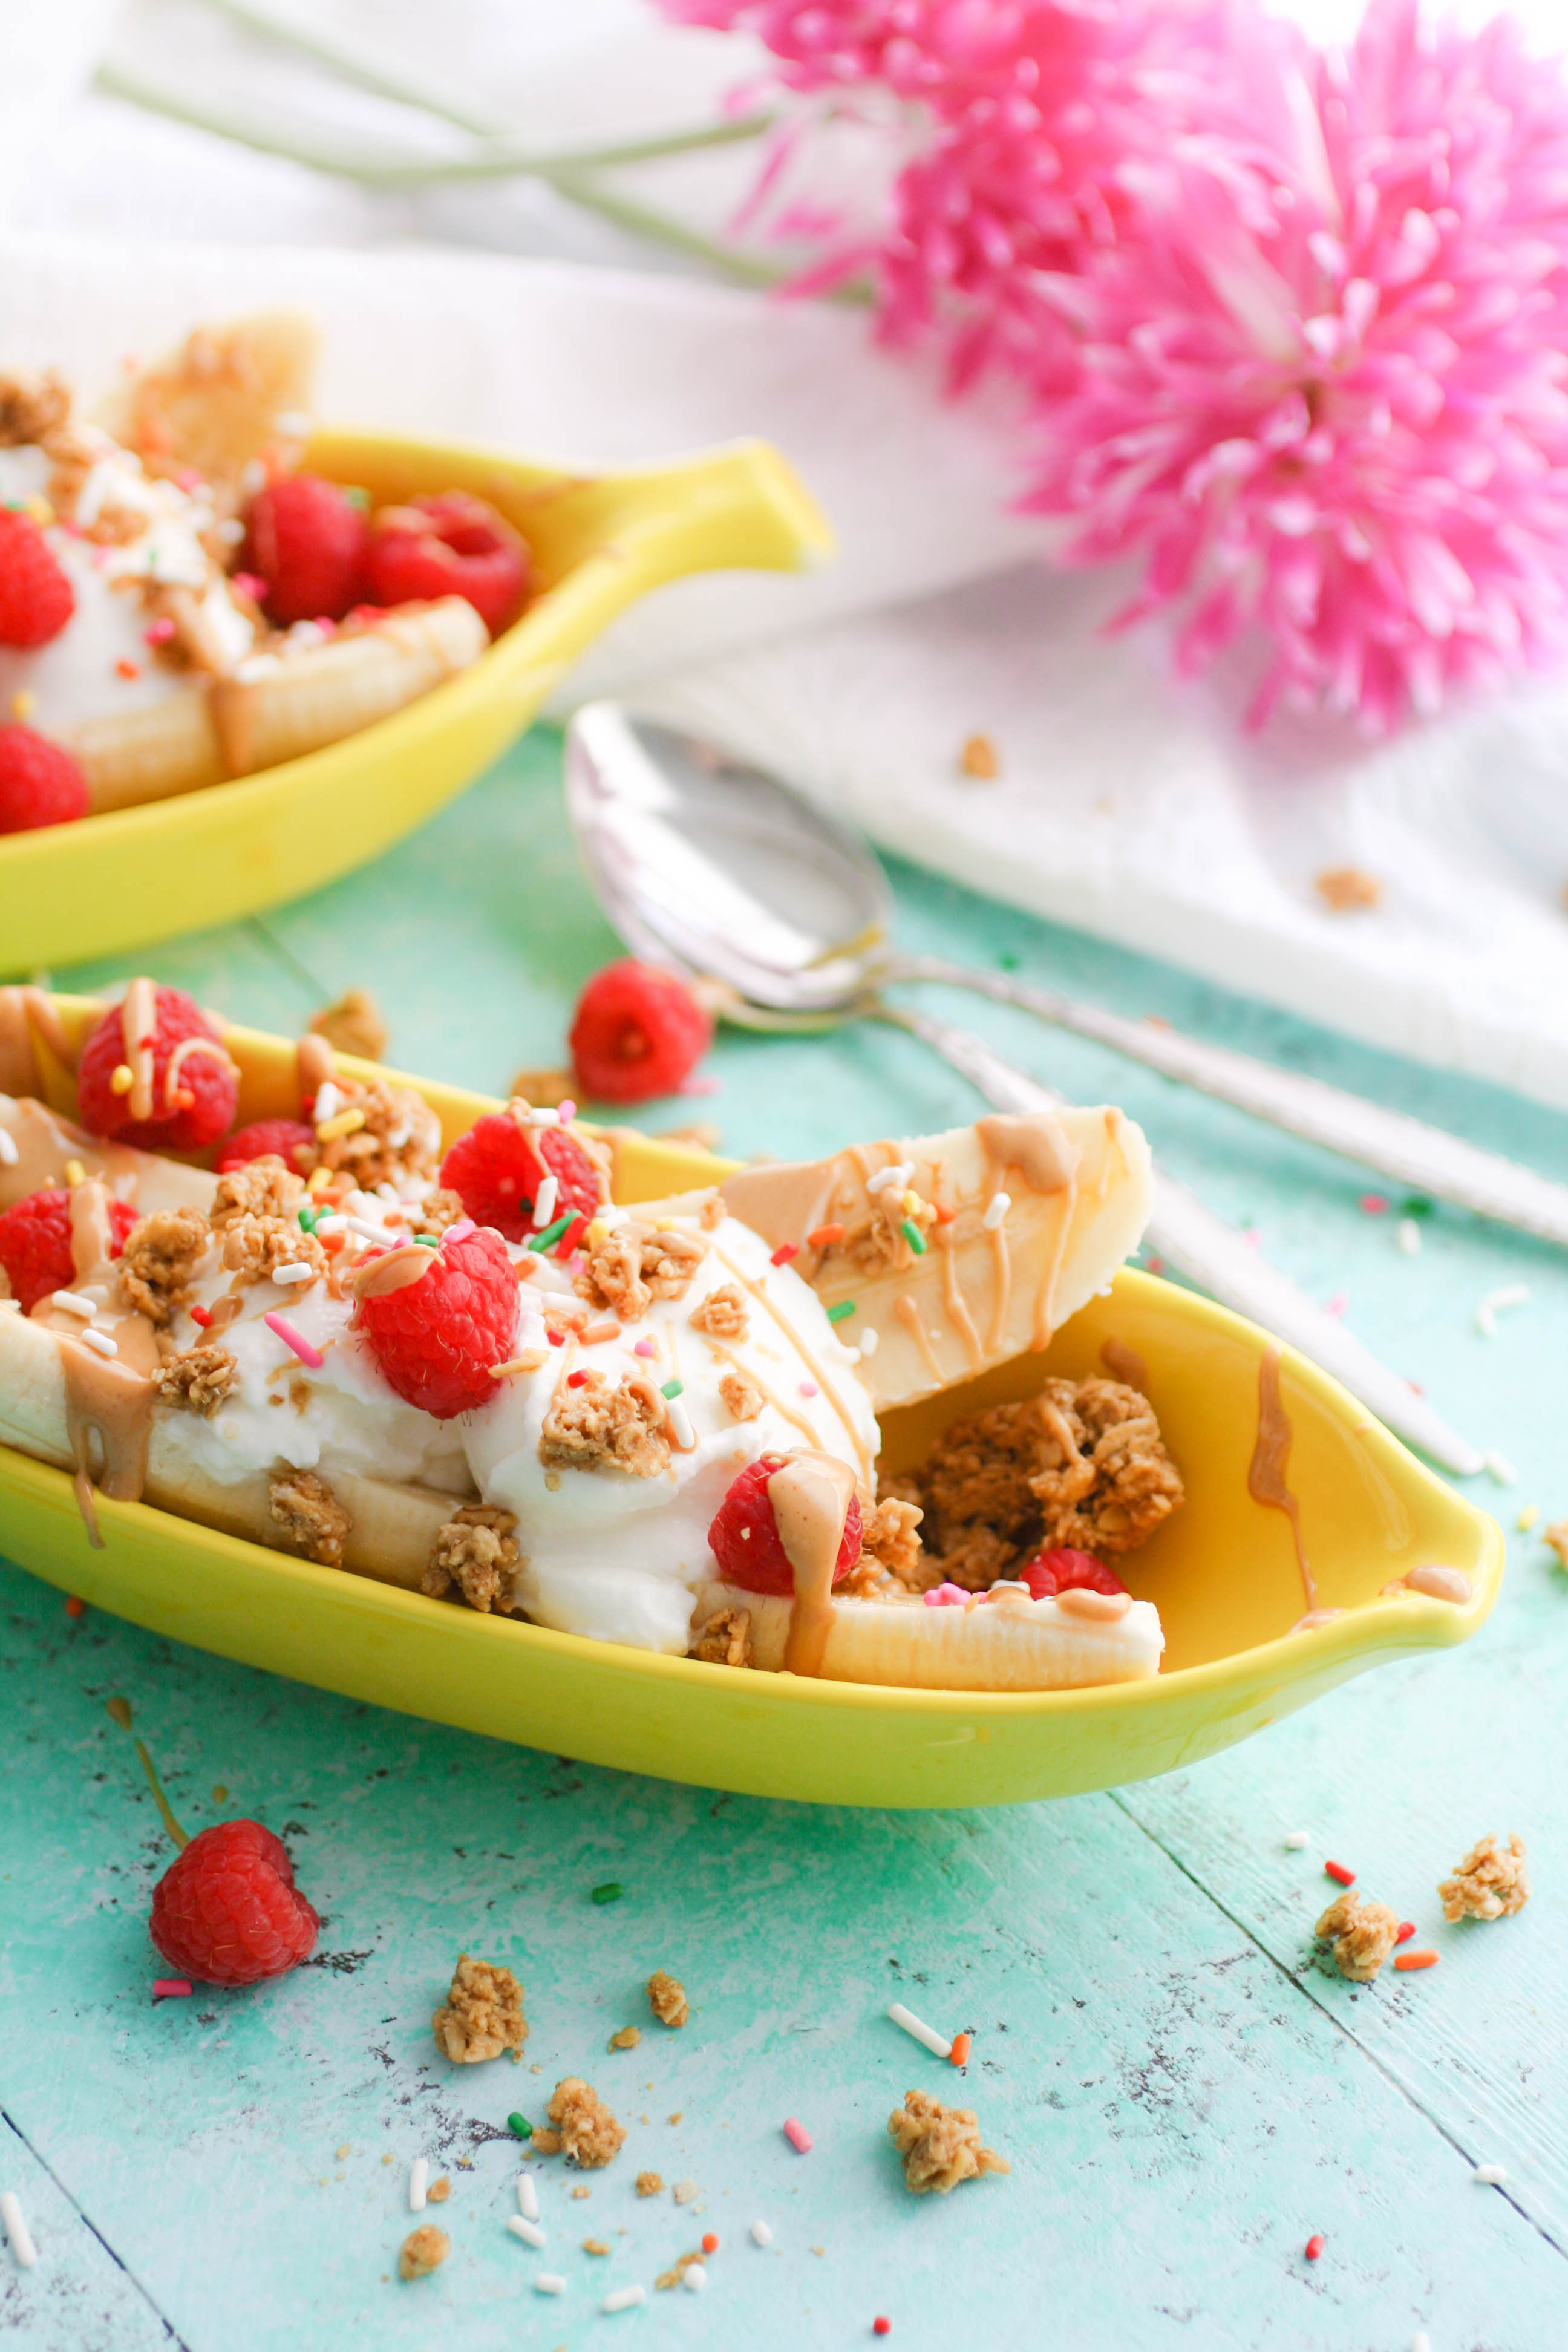 “Peanut Butter & Jelly” Breakfast Banana Splits are so fun for your morning meal! Enjoy these “Peanut Butter & Jelly” Breakfast Banana Splits!